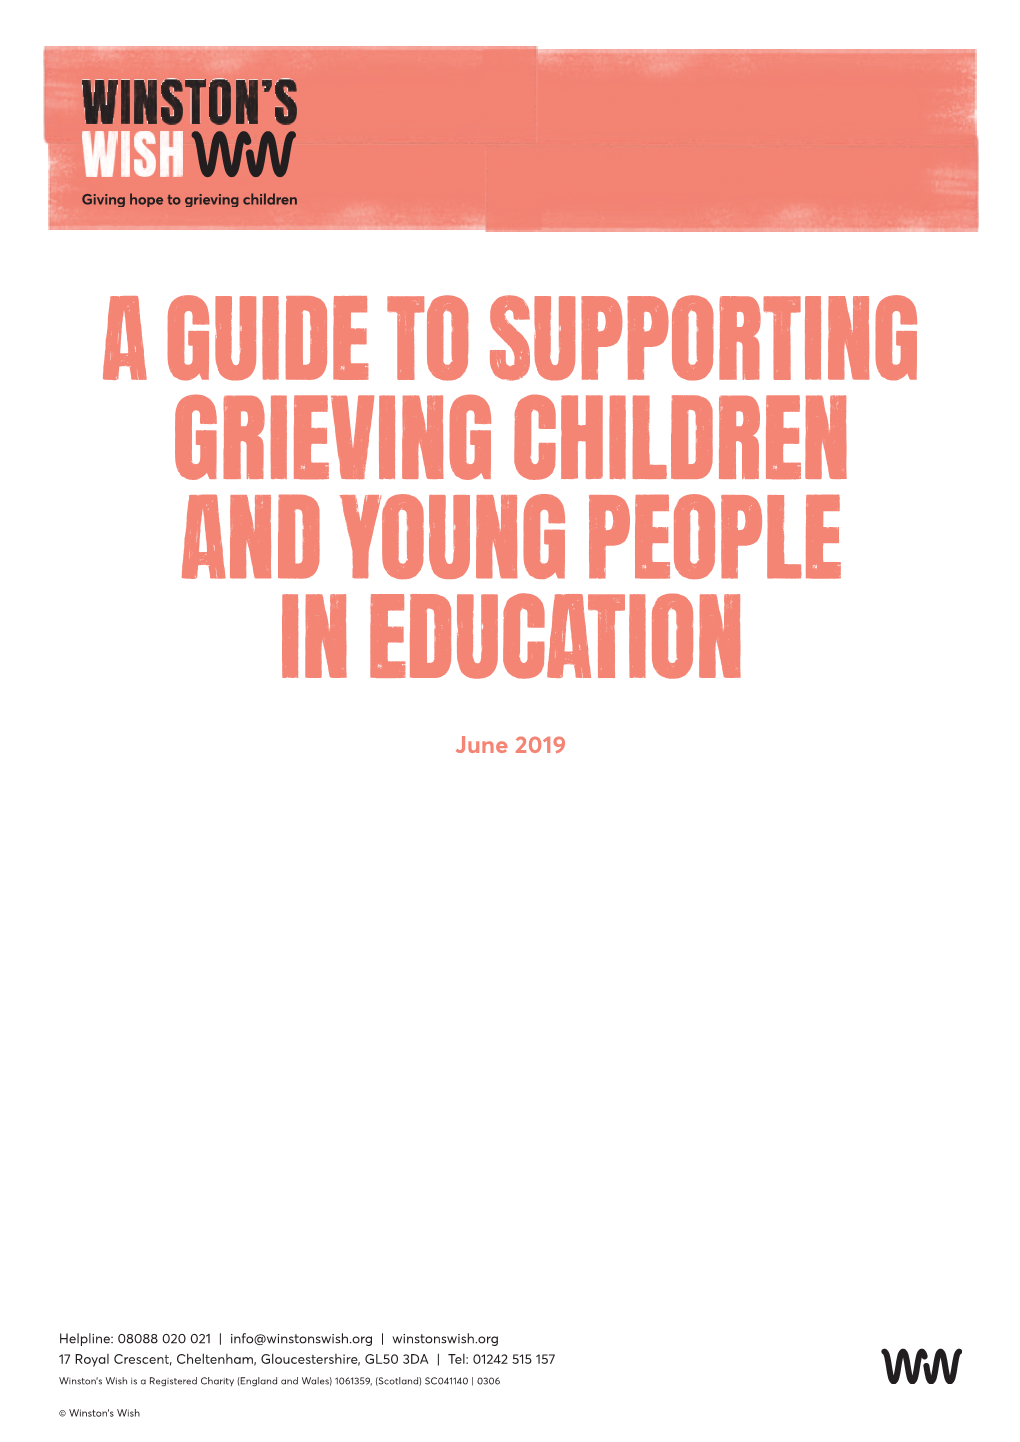 A Guide to Supporting Grieving Children and Young People in Education